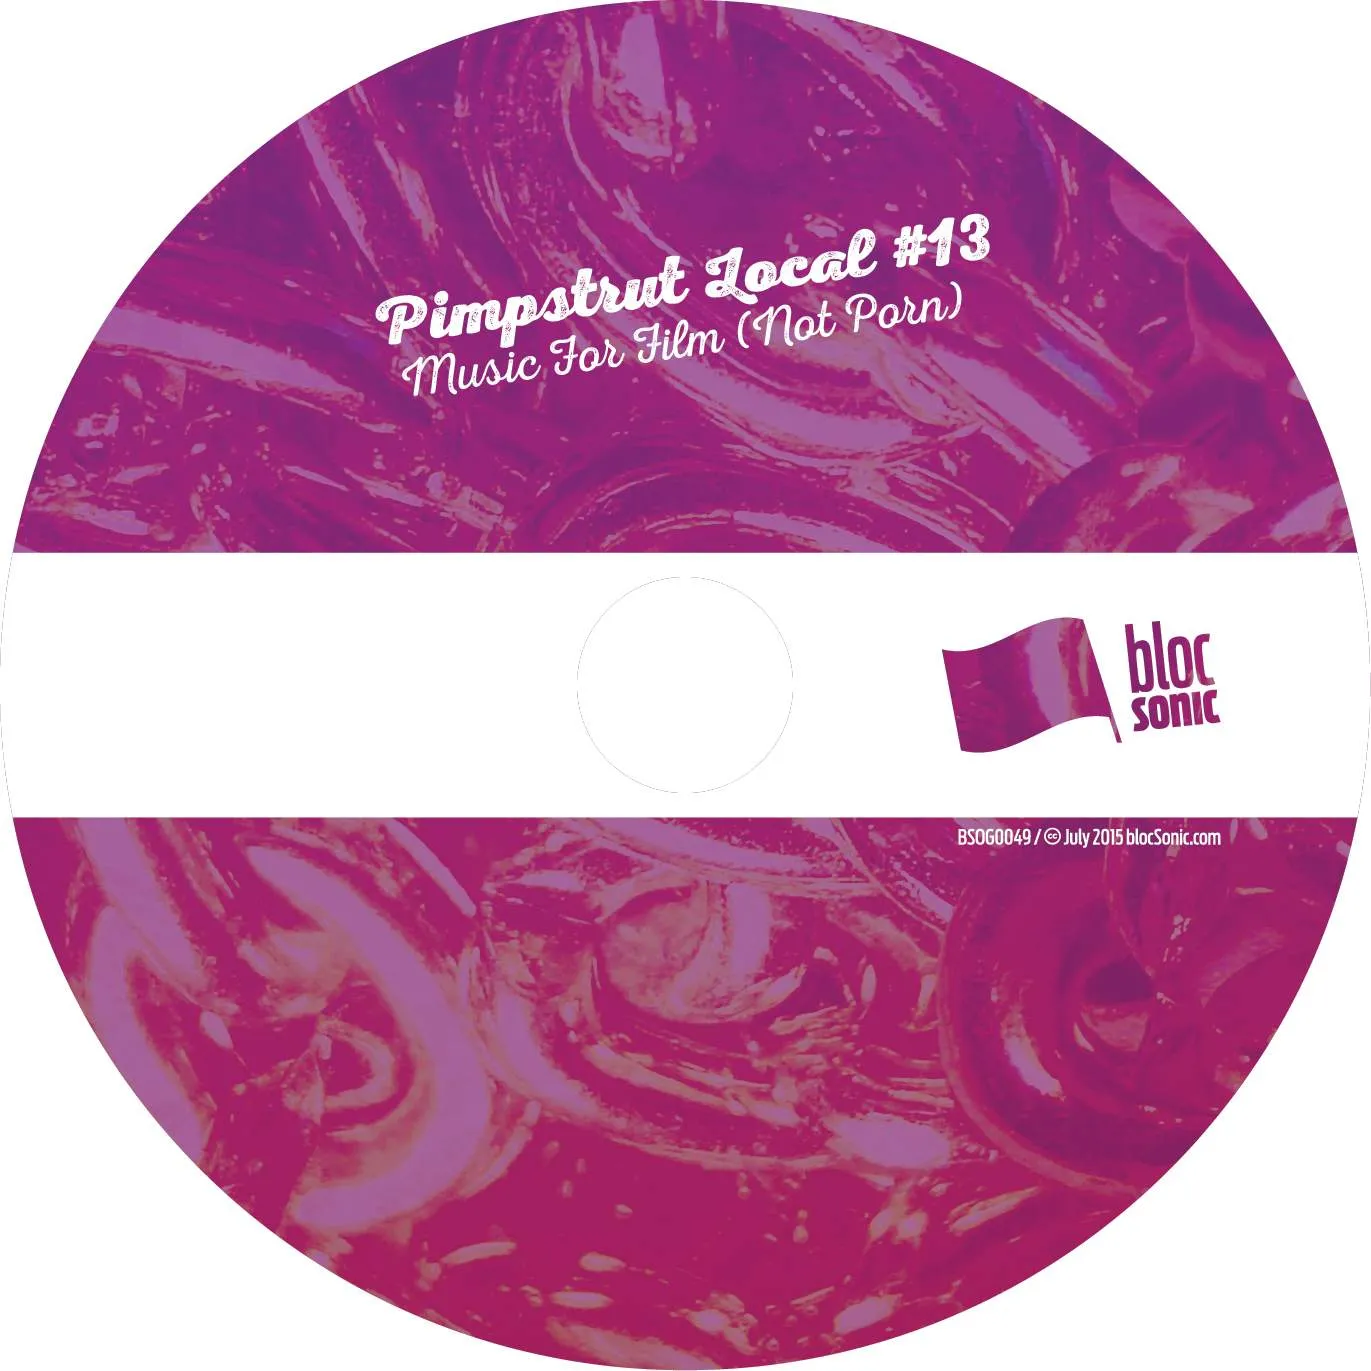 Album disc for “Music For Film (Not Porn)” by Pimpstrut Local #13